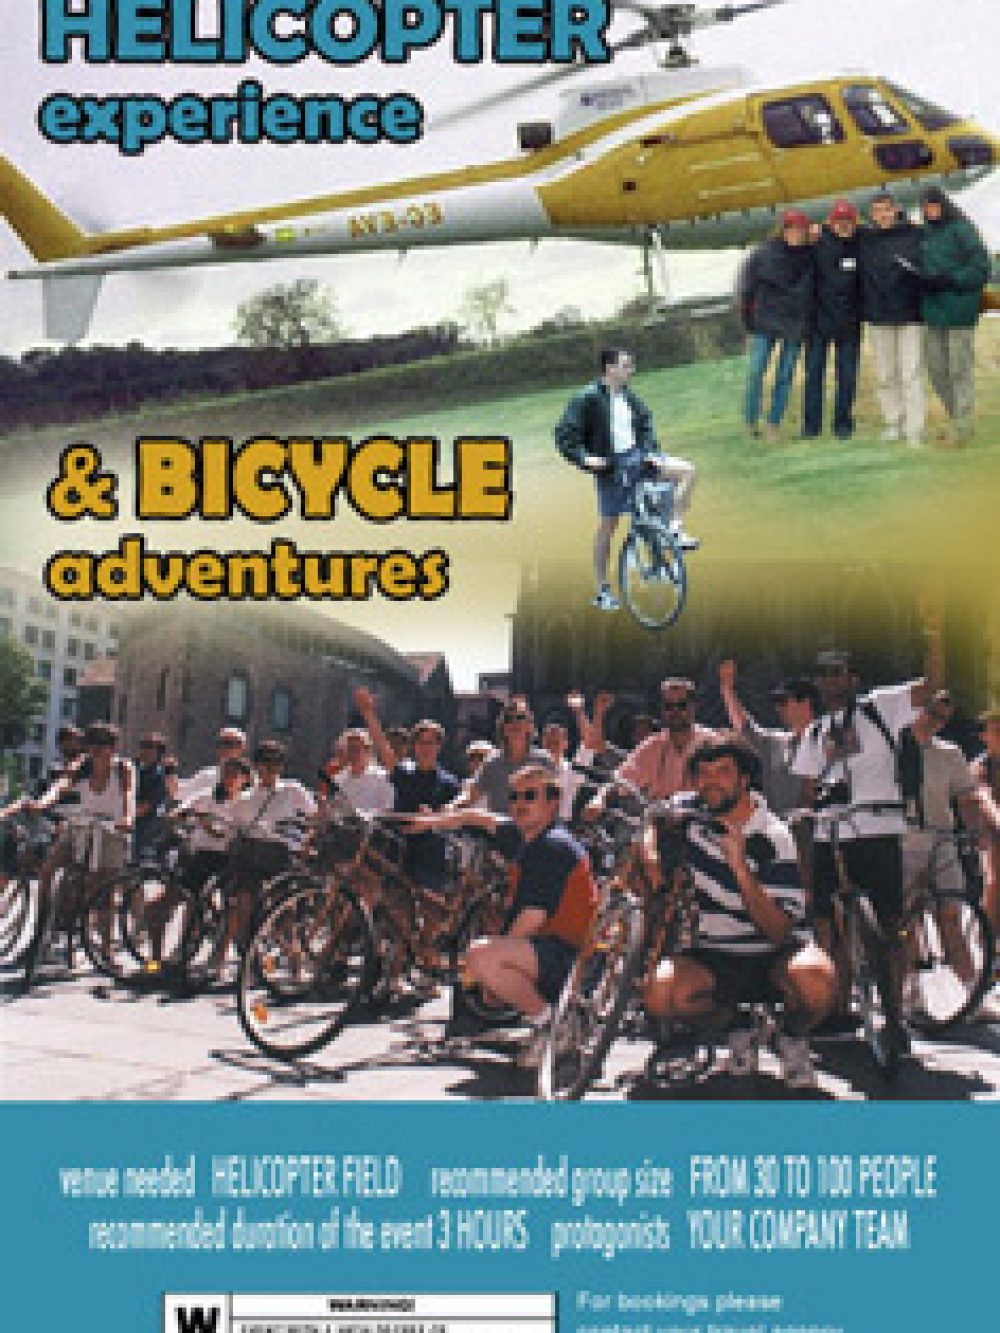 helicopter_experience_and_bicycle_adventures_vertical_web